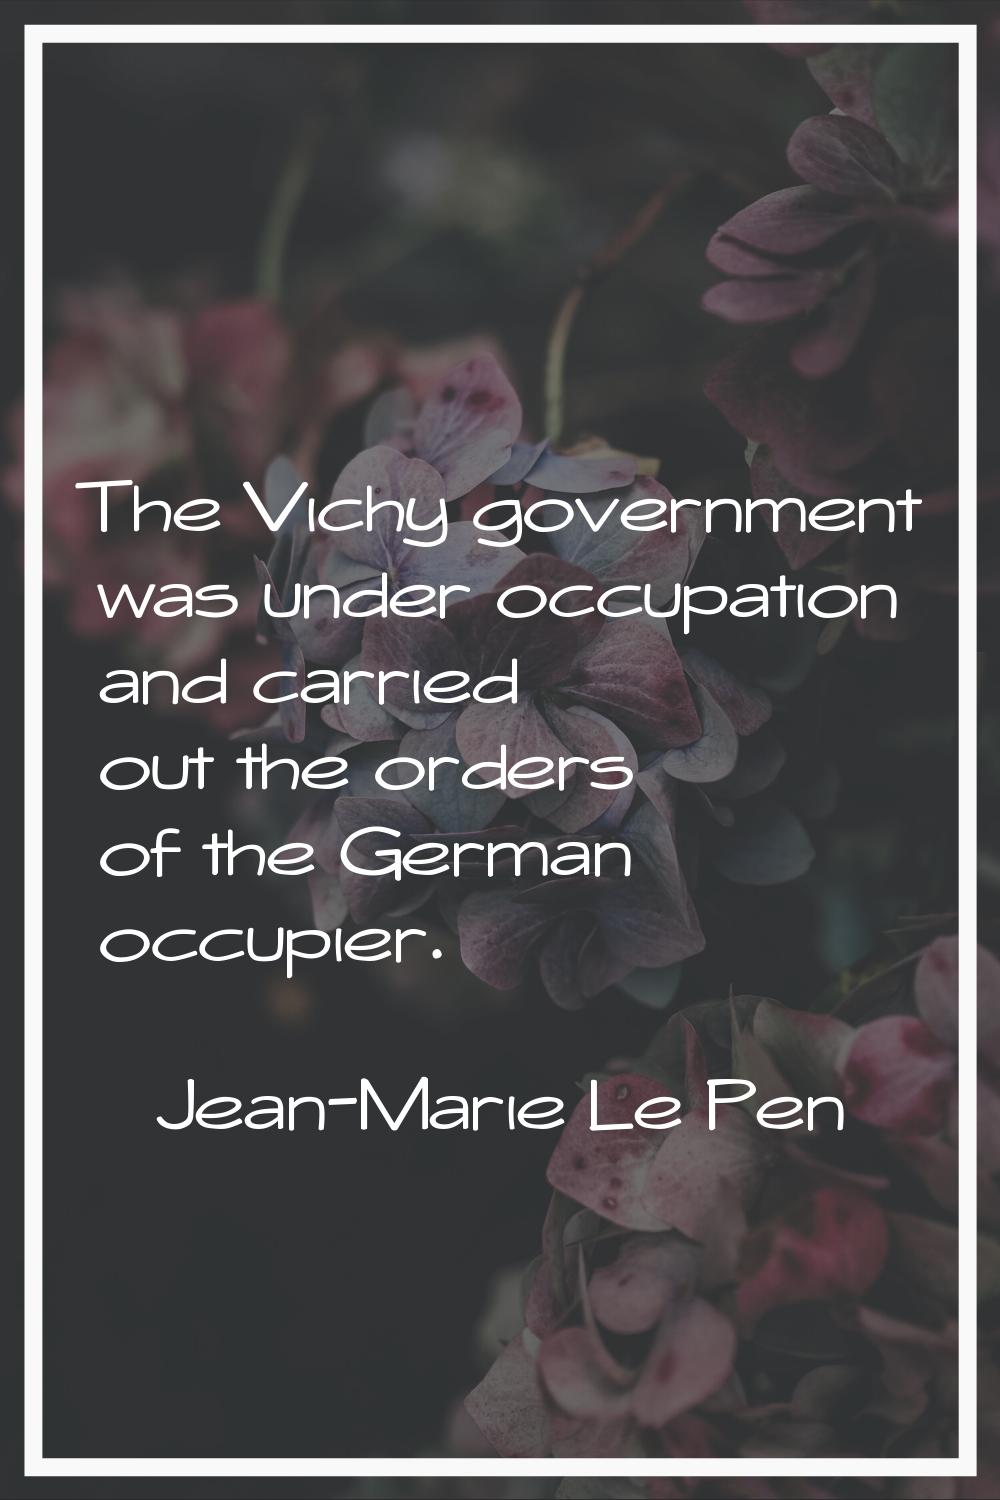 The Vichy government was under occupation and carried out the orders of the German occupier.